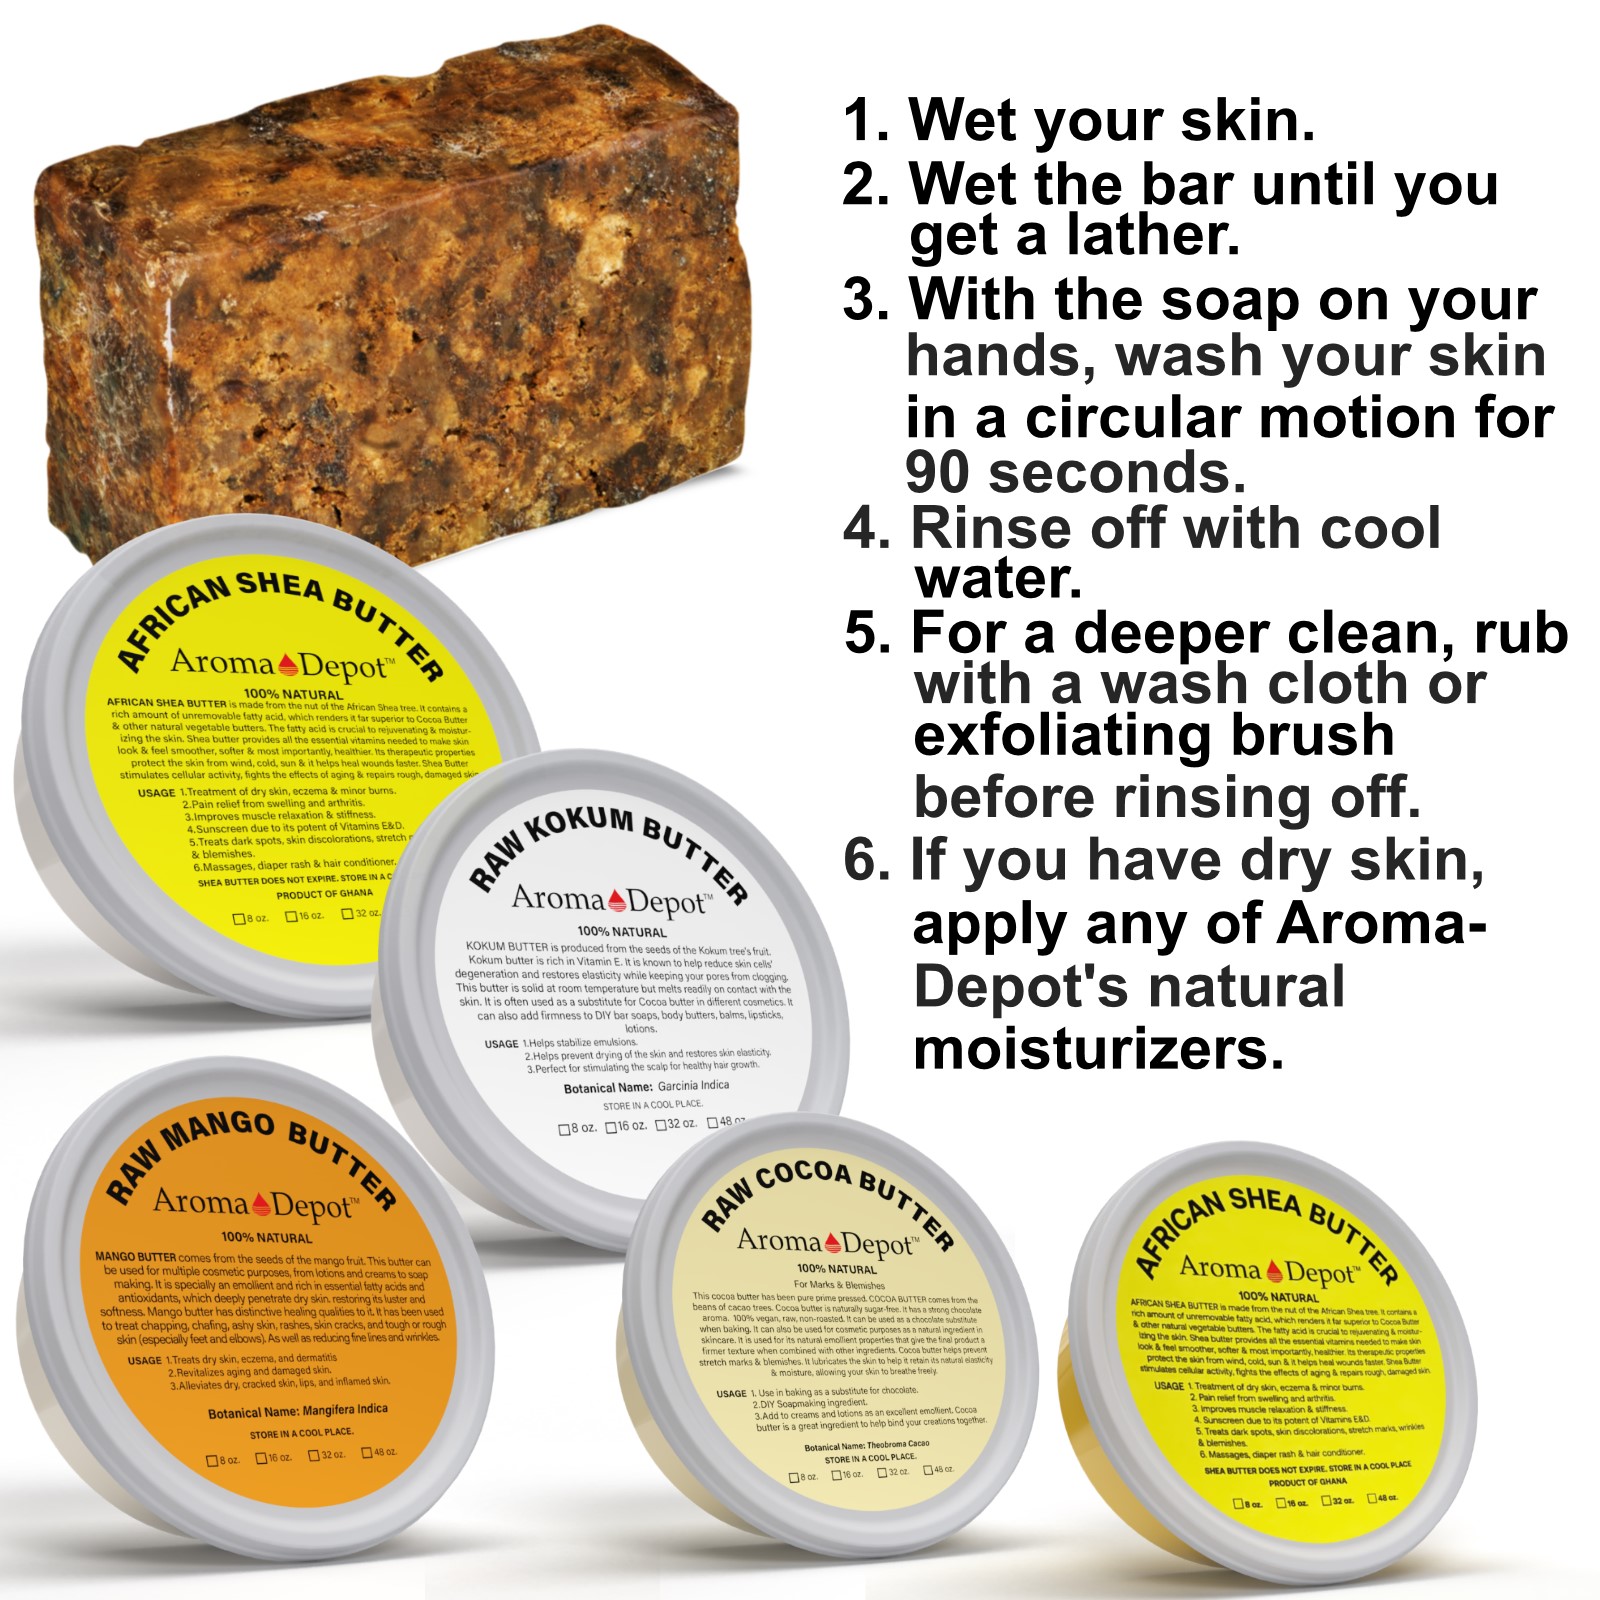 Black Soap and Natural Butters